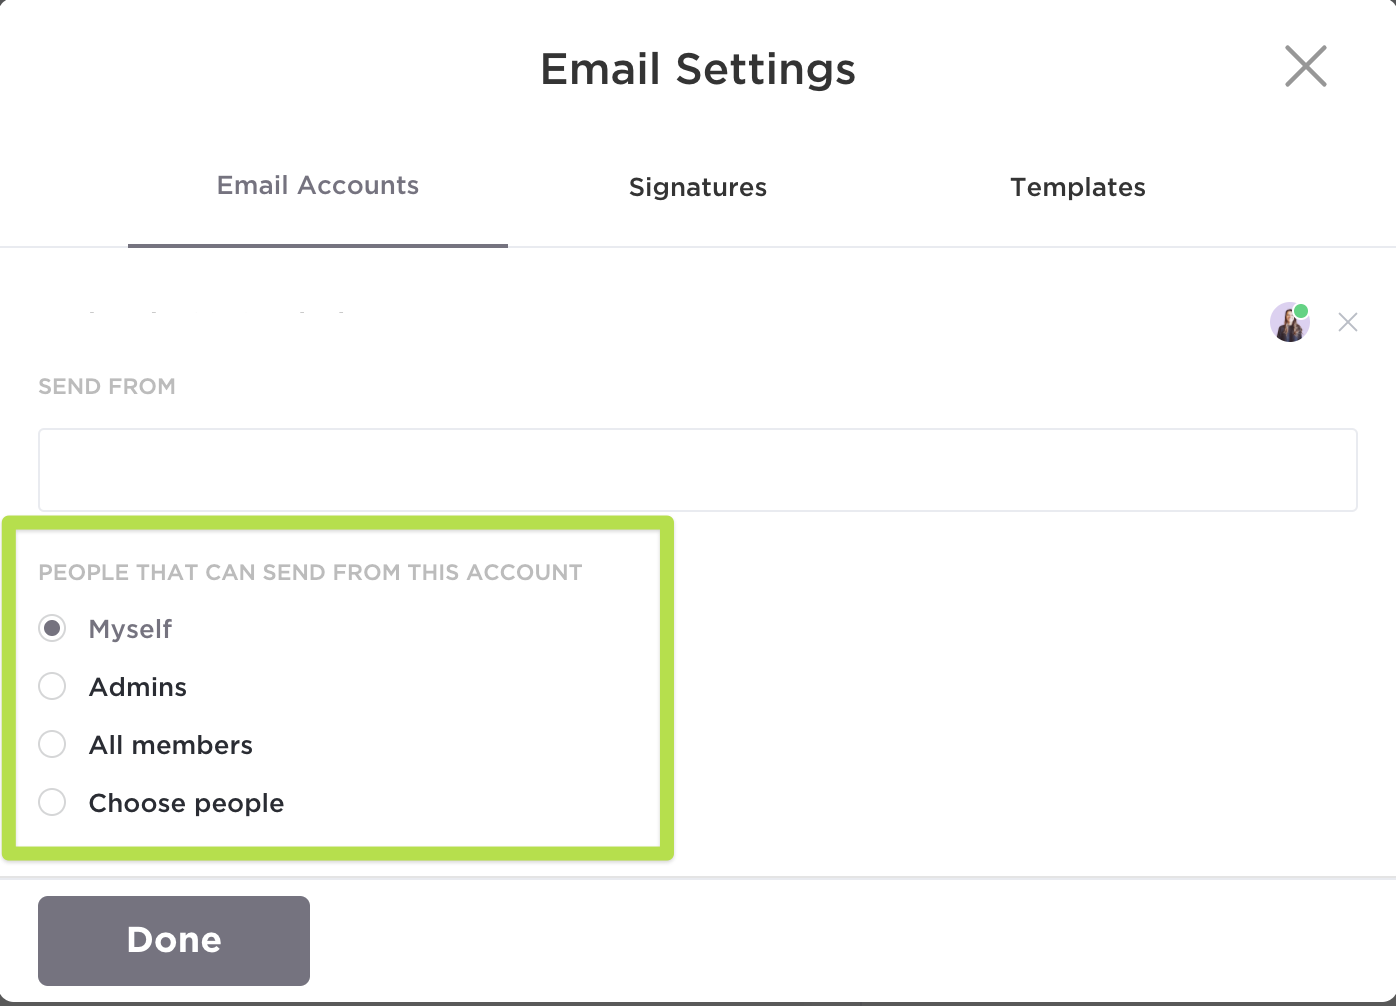 Screenshot showing the permissions options for who can send emails from a particular email account in ClickUp.